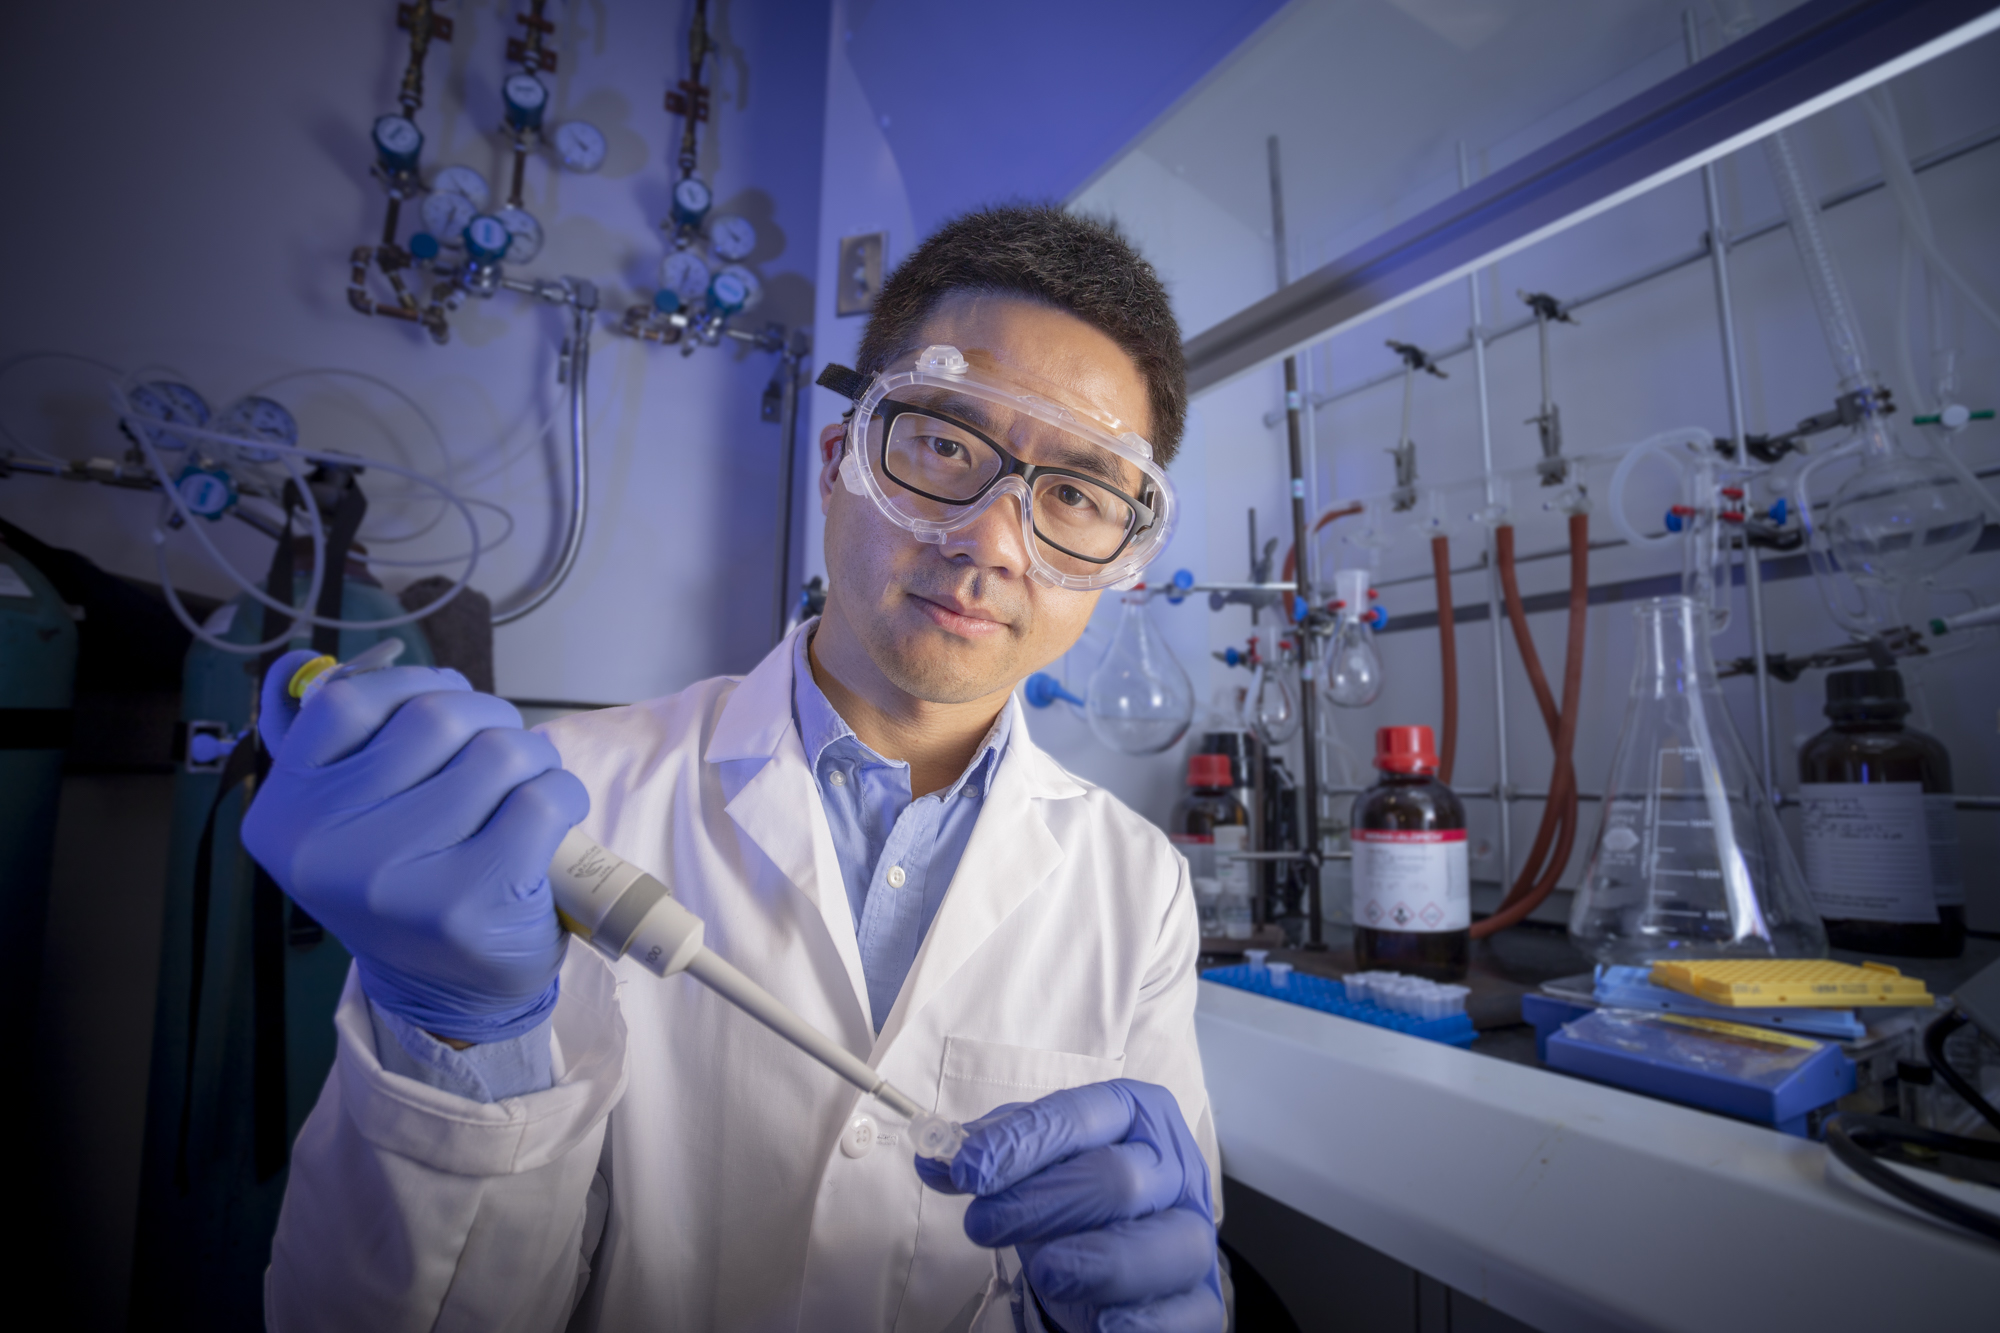 Julian Zhu in a white lab coat and blue gloves holds a pipette.